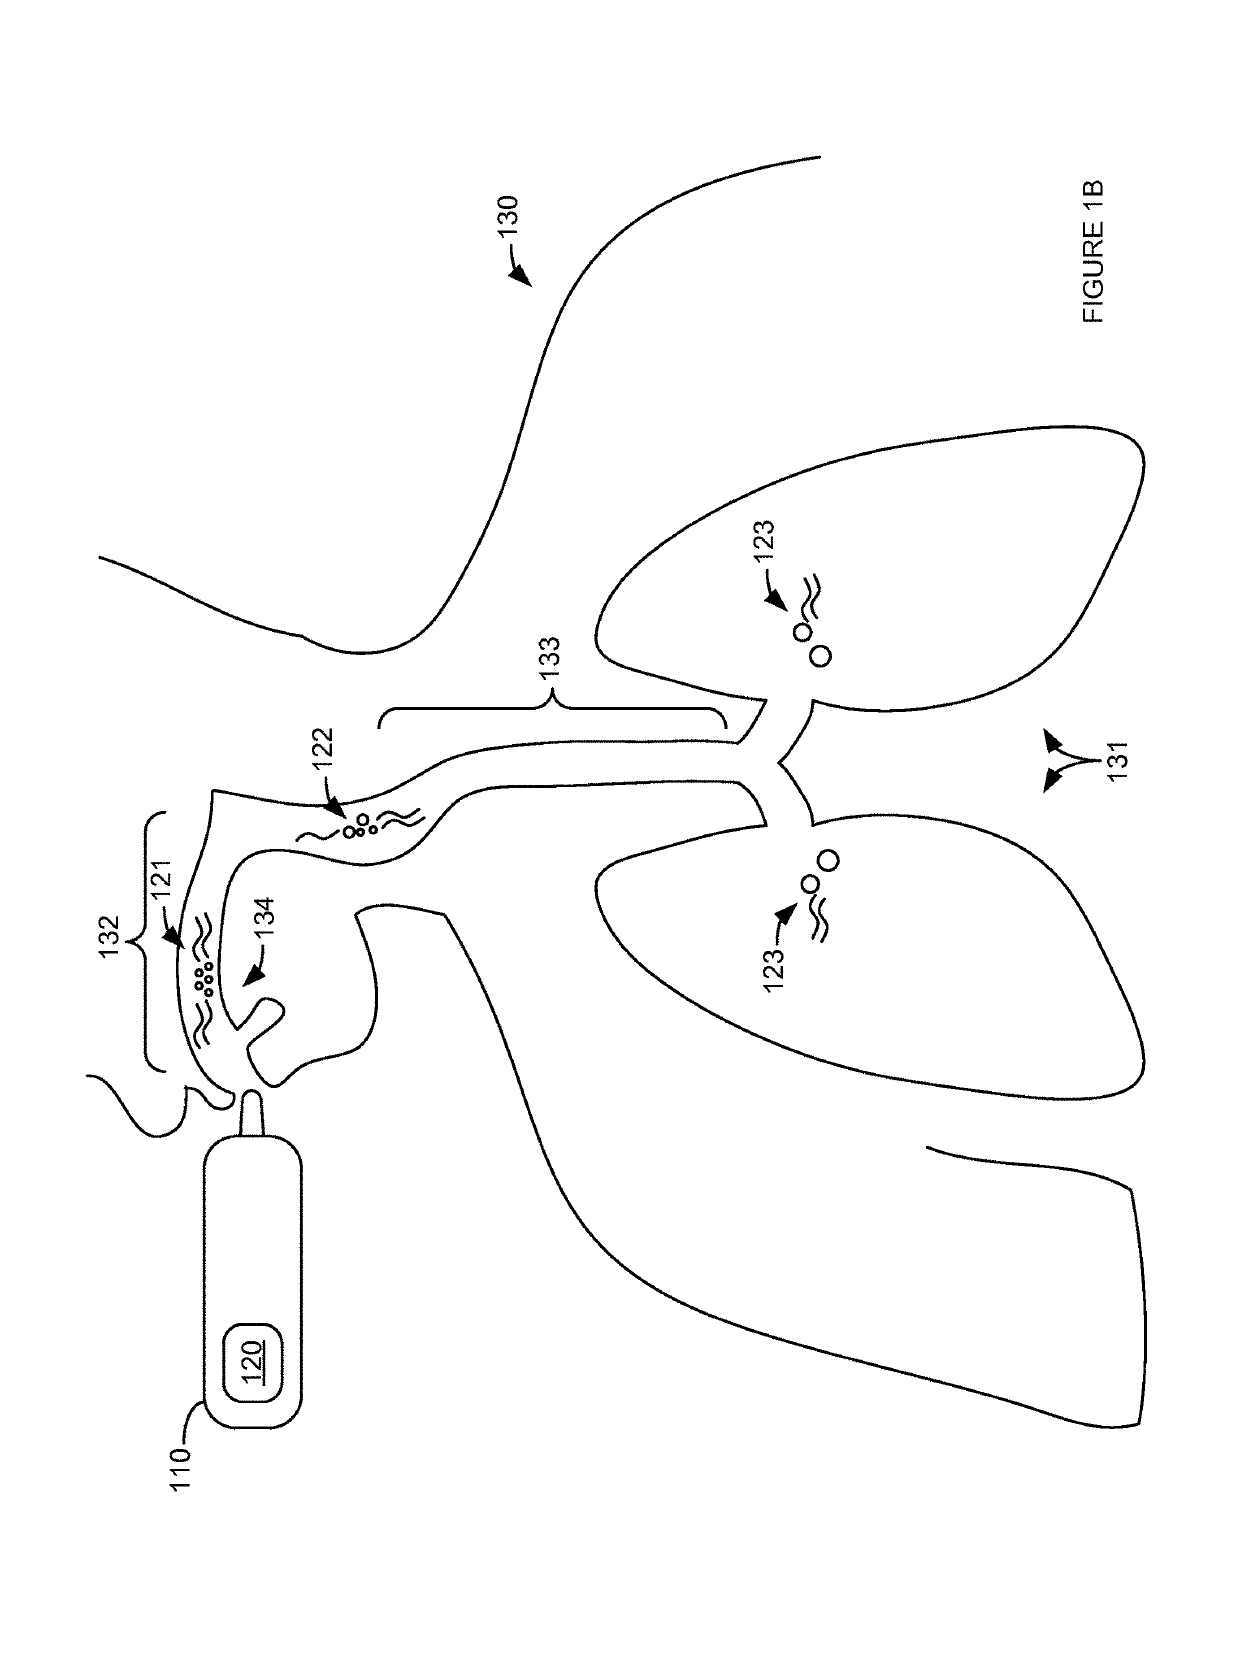 Thermal modulation of an inhalable medicament